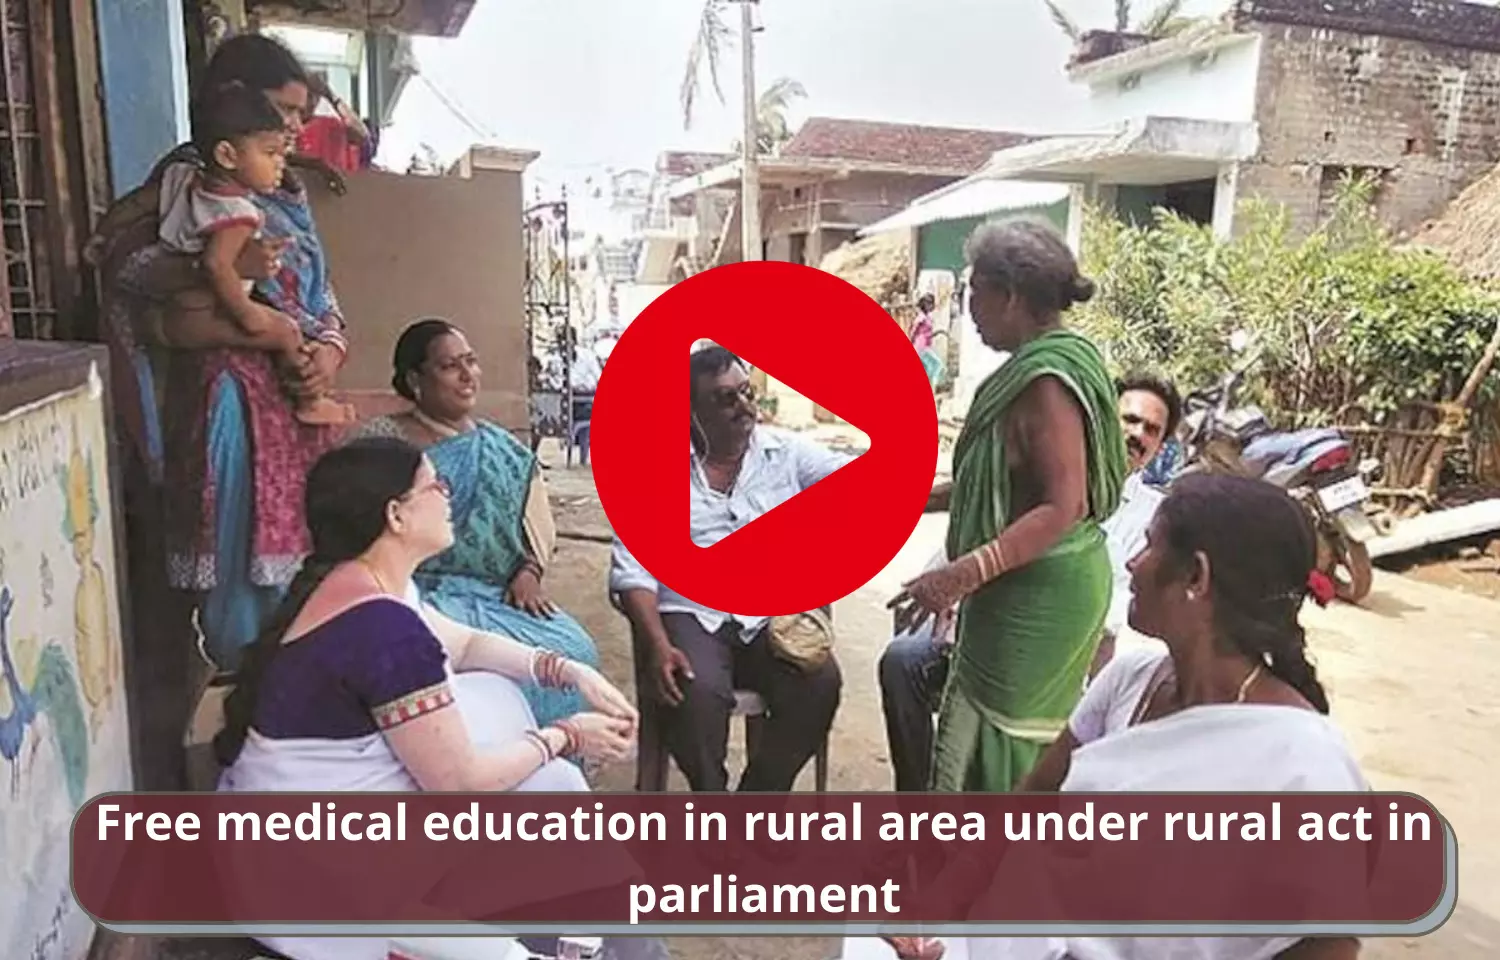 Free medical education in rural area under rural act in parliament